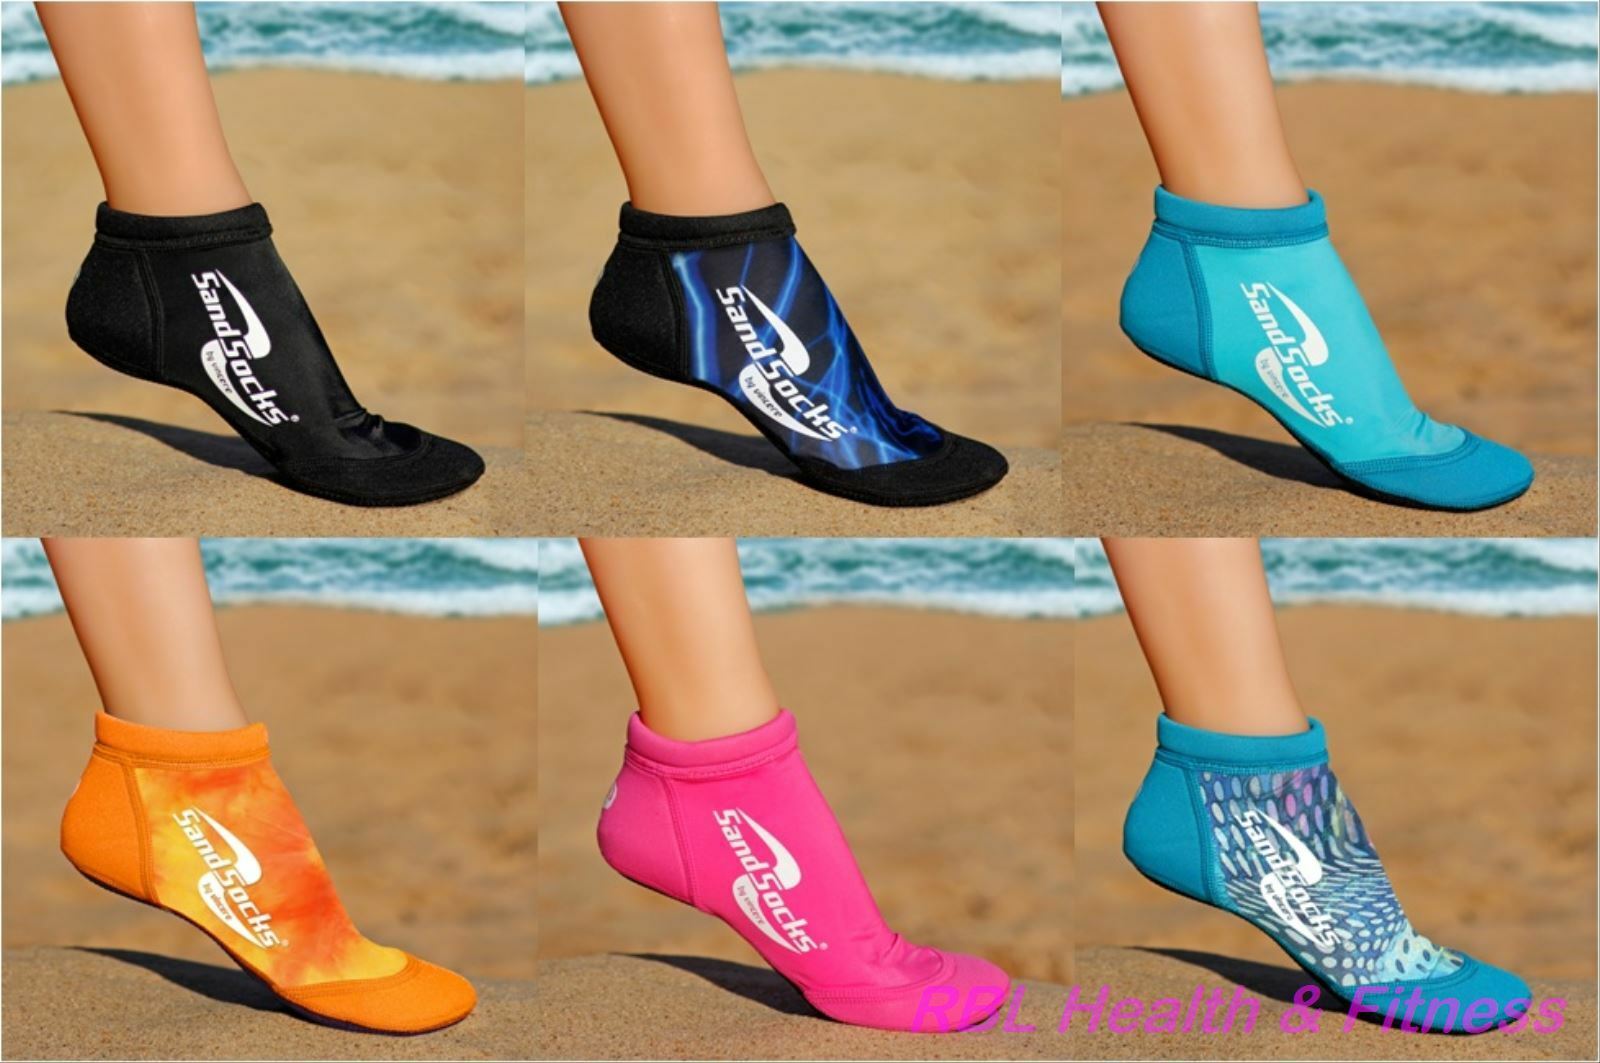 Low Cut Sprites By Vincere Sand Socks - Beach Volleyball - Sand Soccer - Sport